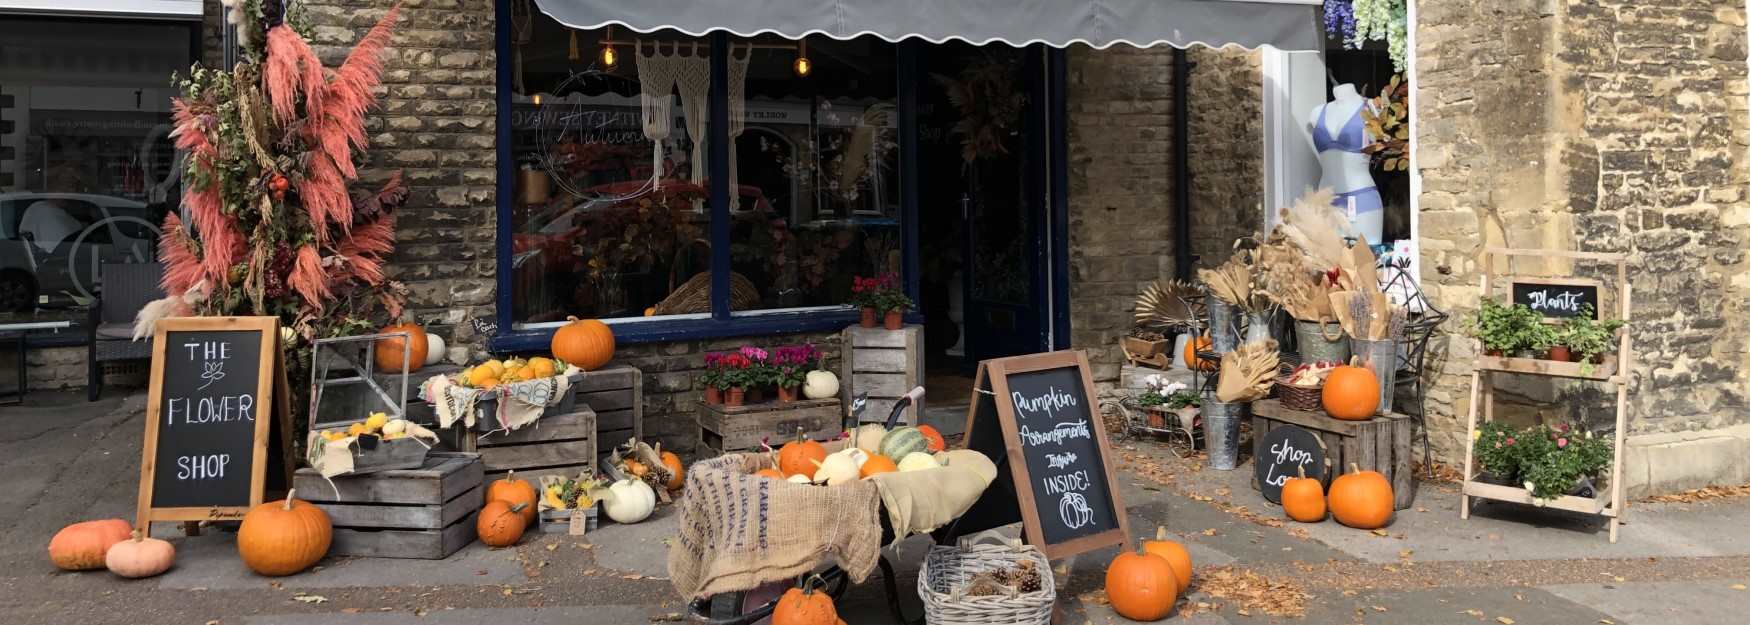 Autumnal display at The Flower Shop in Witney